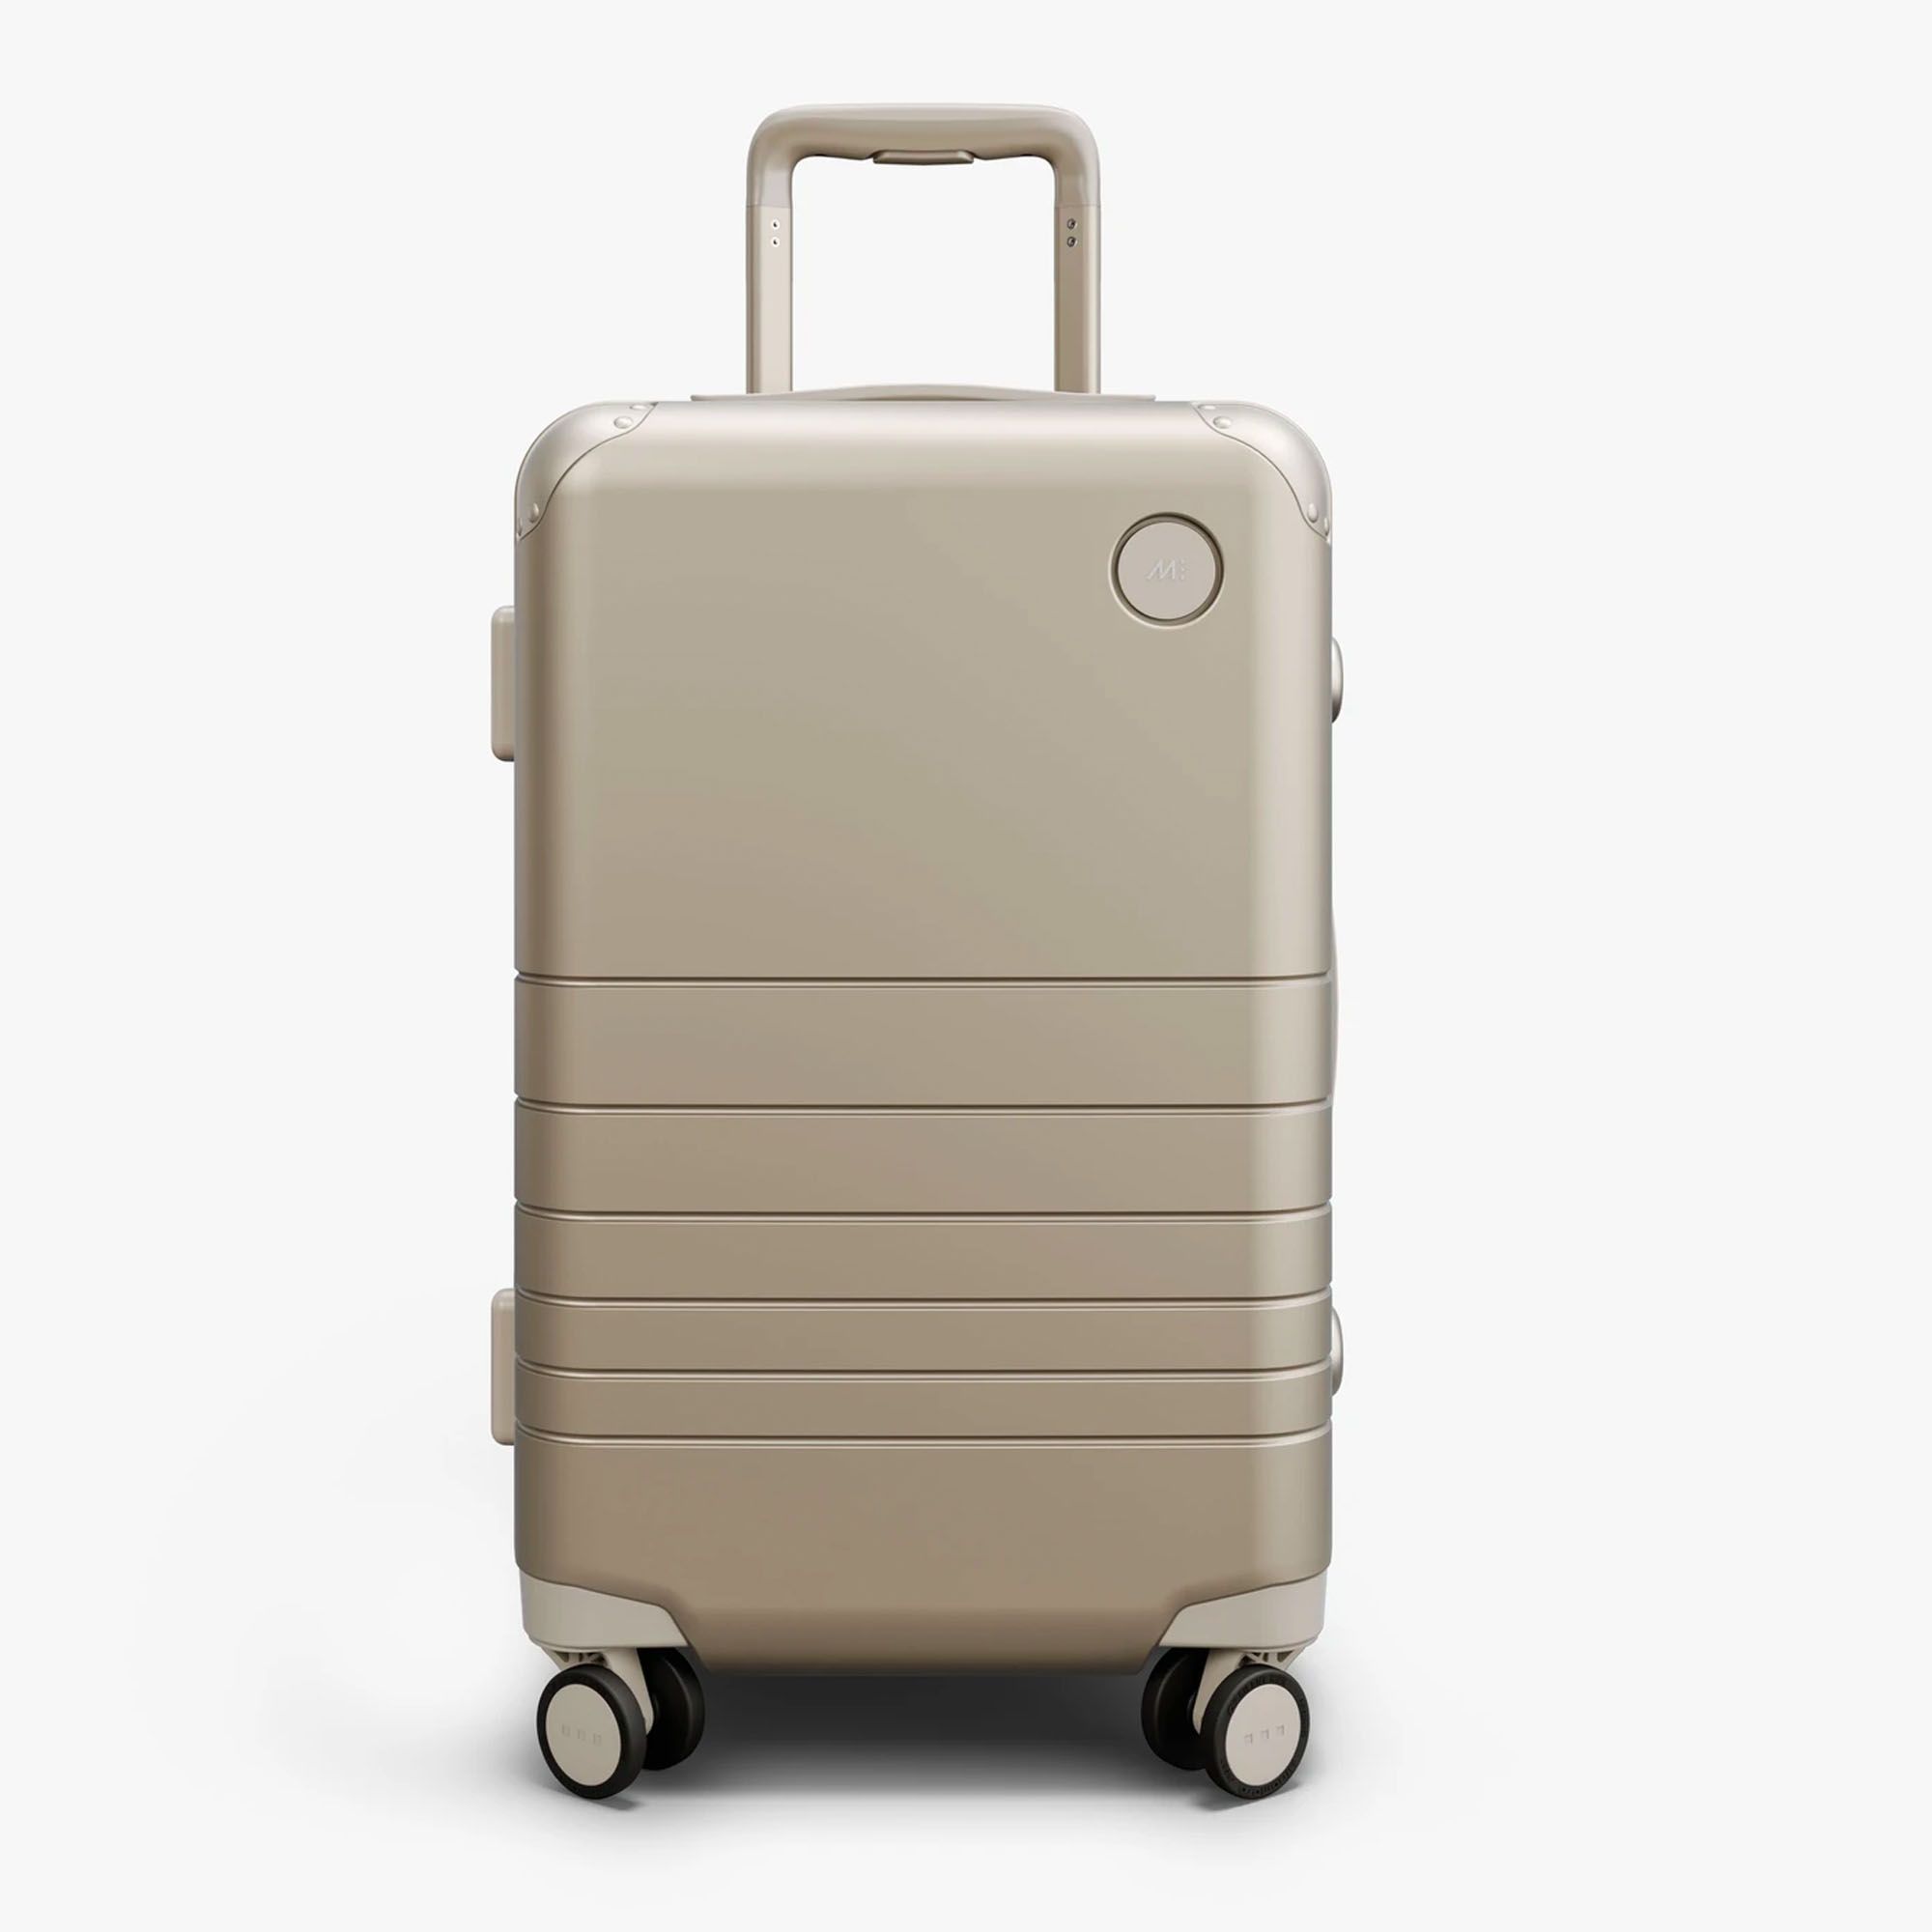 Hybrid Carry-On Suitcases